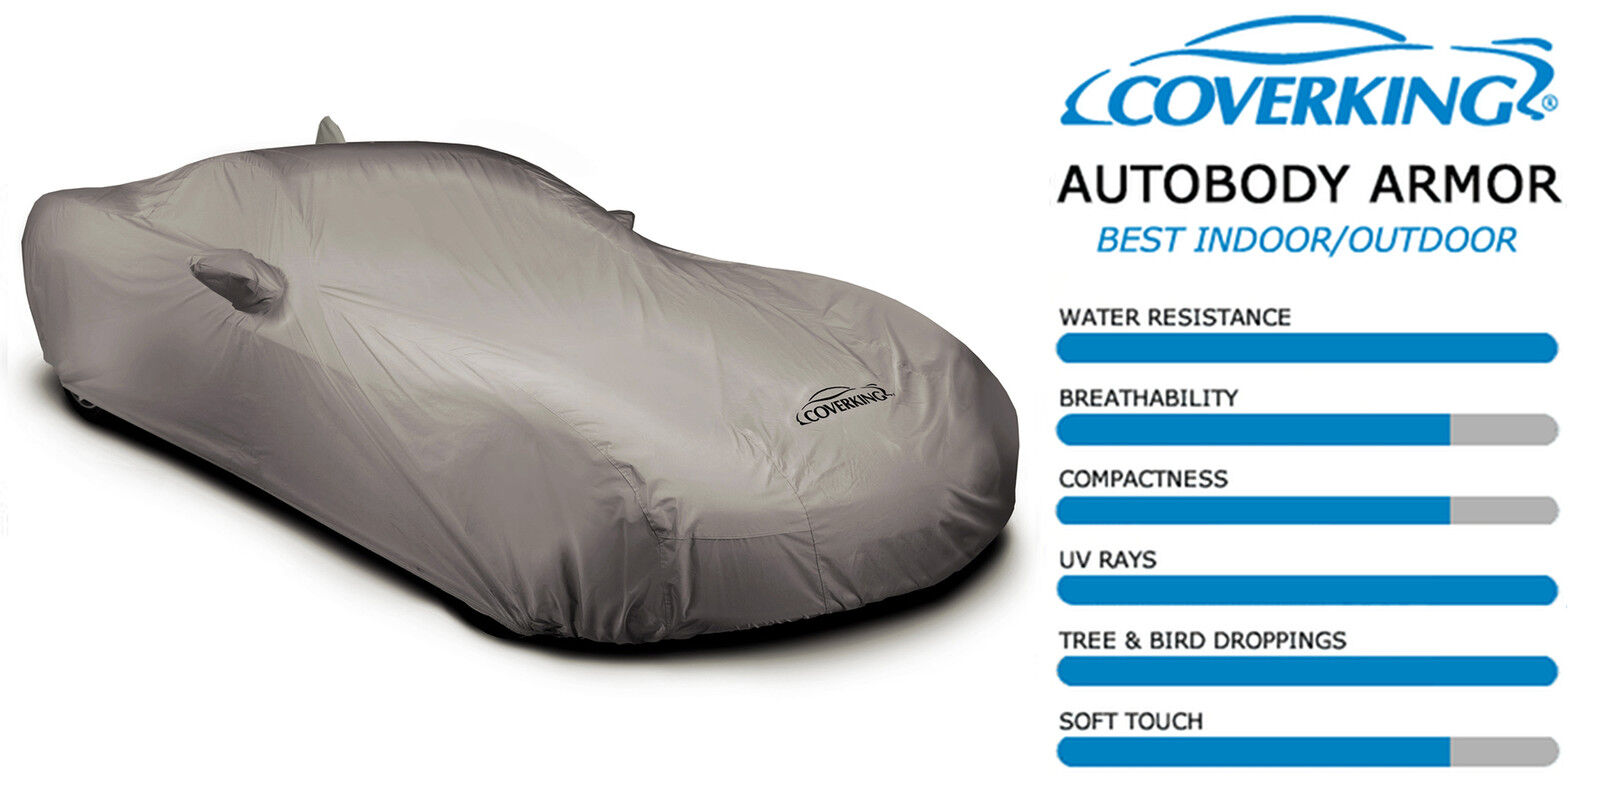 COVERKING AUTOBODY ARMOR all-weather CAR COVER made for 1990-1996 Corvette ZR1